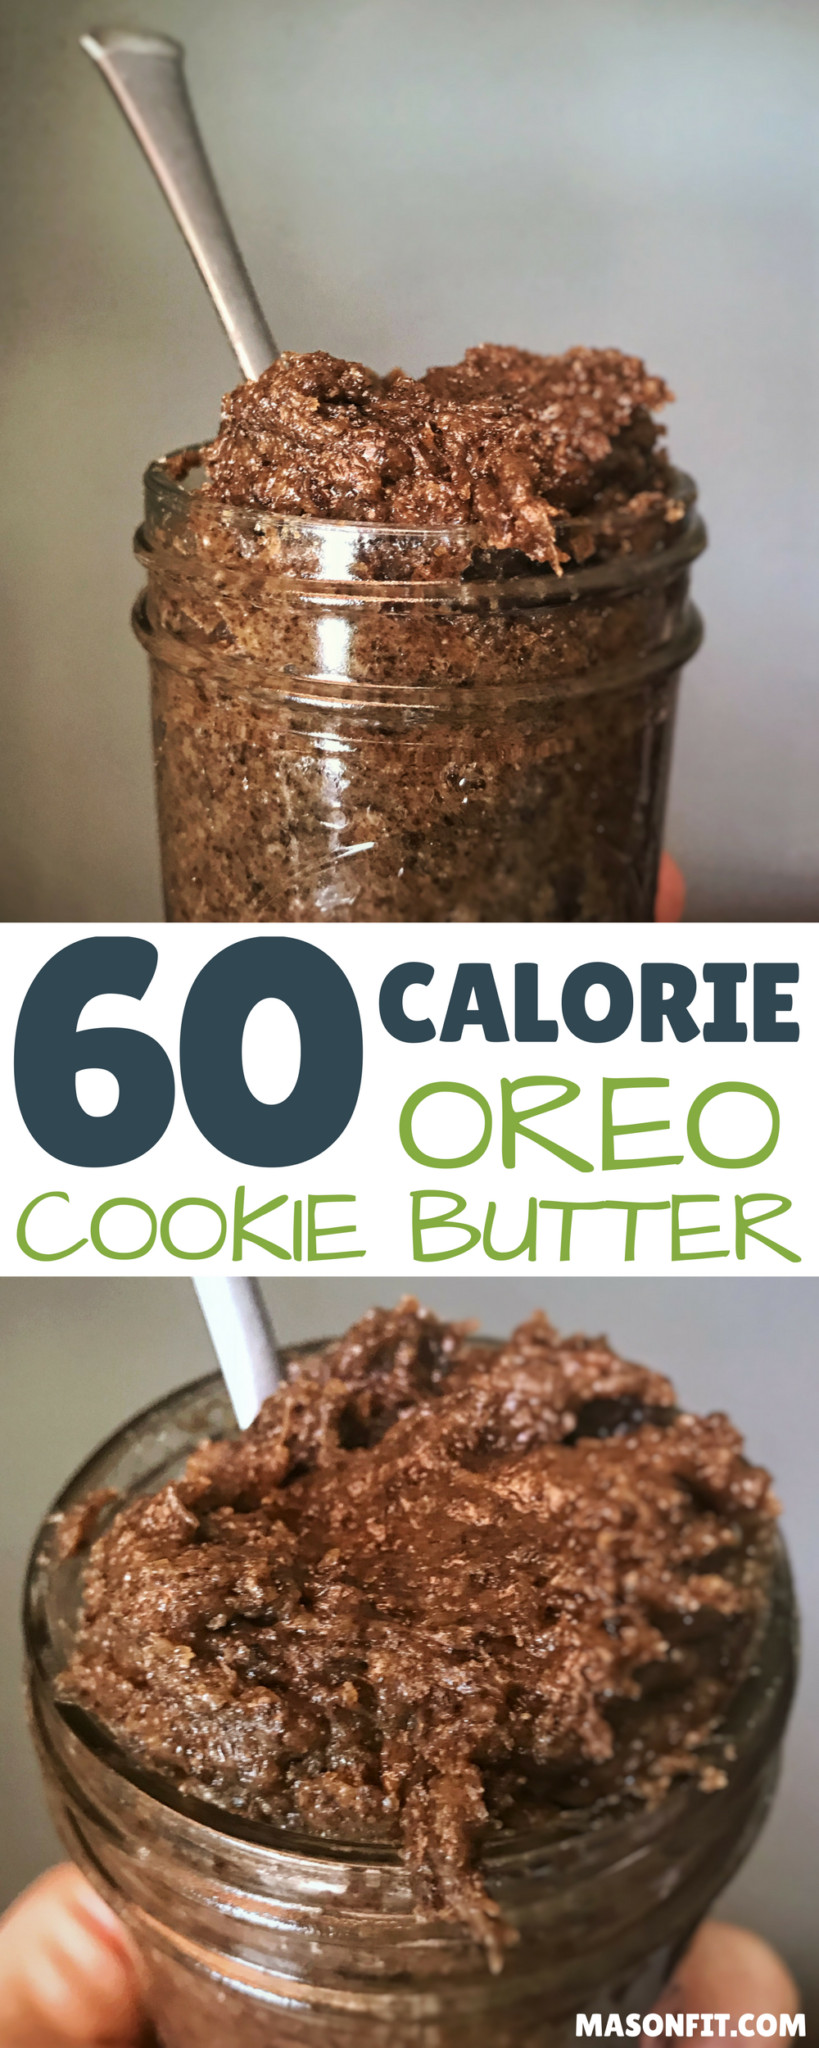 Healthy Cookies Recipe Low Calorie
 An Oreo flavored healthy cookie butter recipe that has 